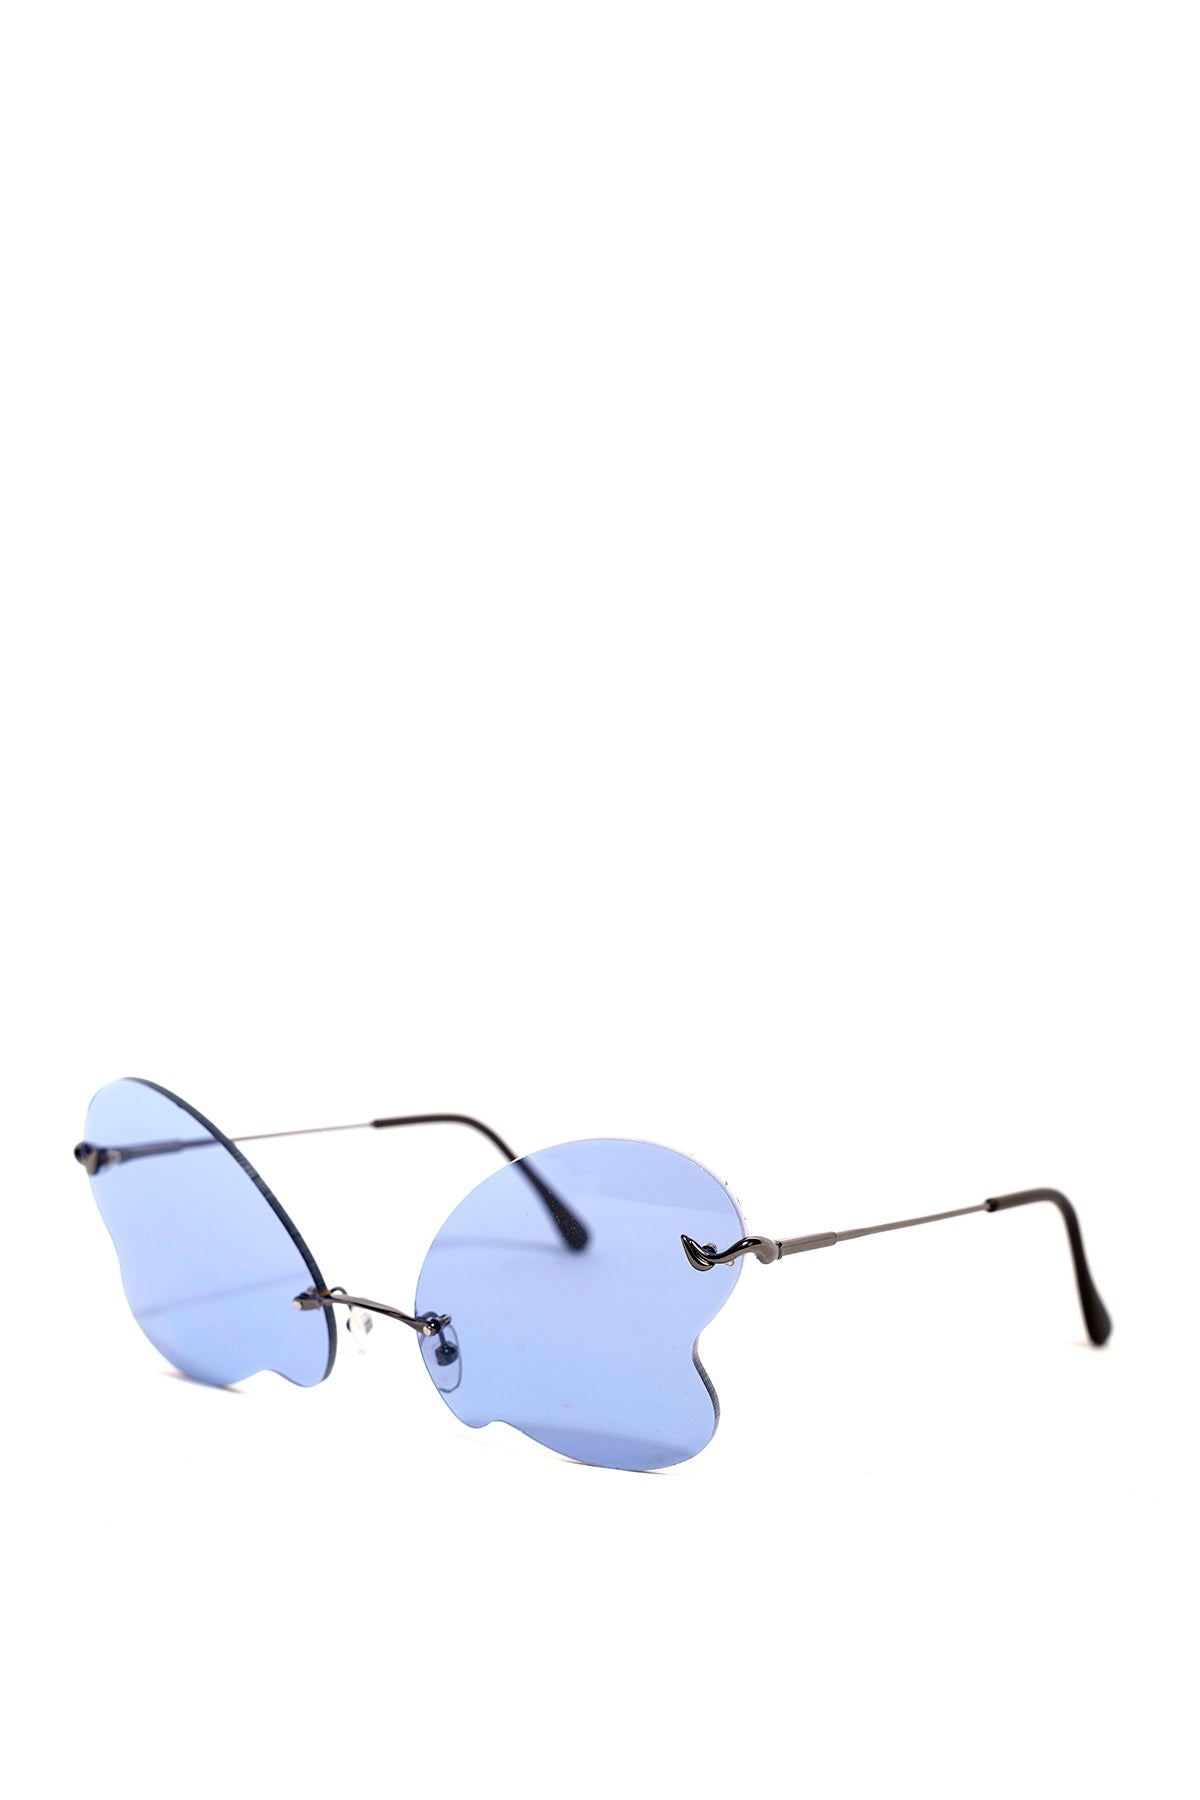 BLUE BUTTERFLY SUNGLASSES